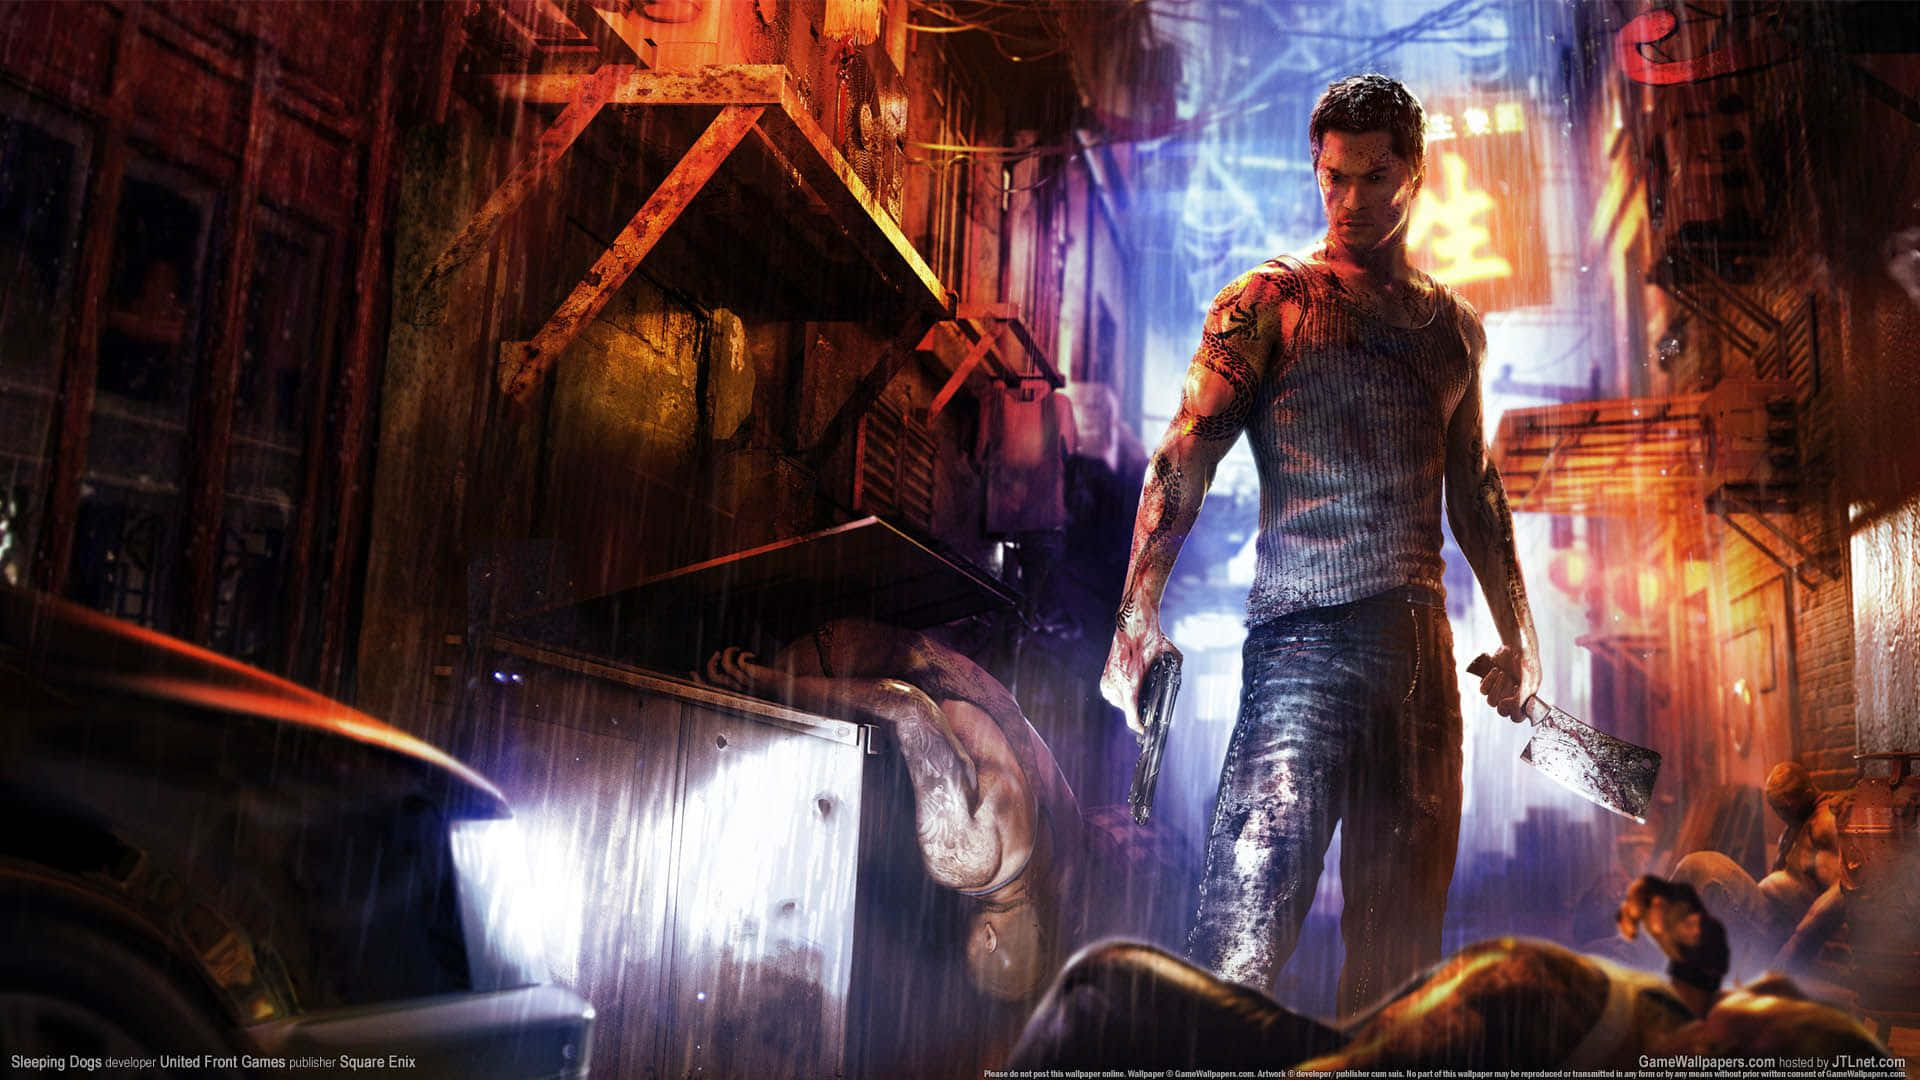 Take to the streets of Hong Kong as undercover cop Wei Shen in the award-winning game “Sleeping Dogs”.